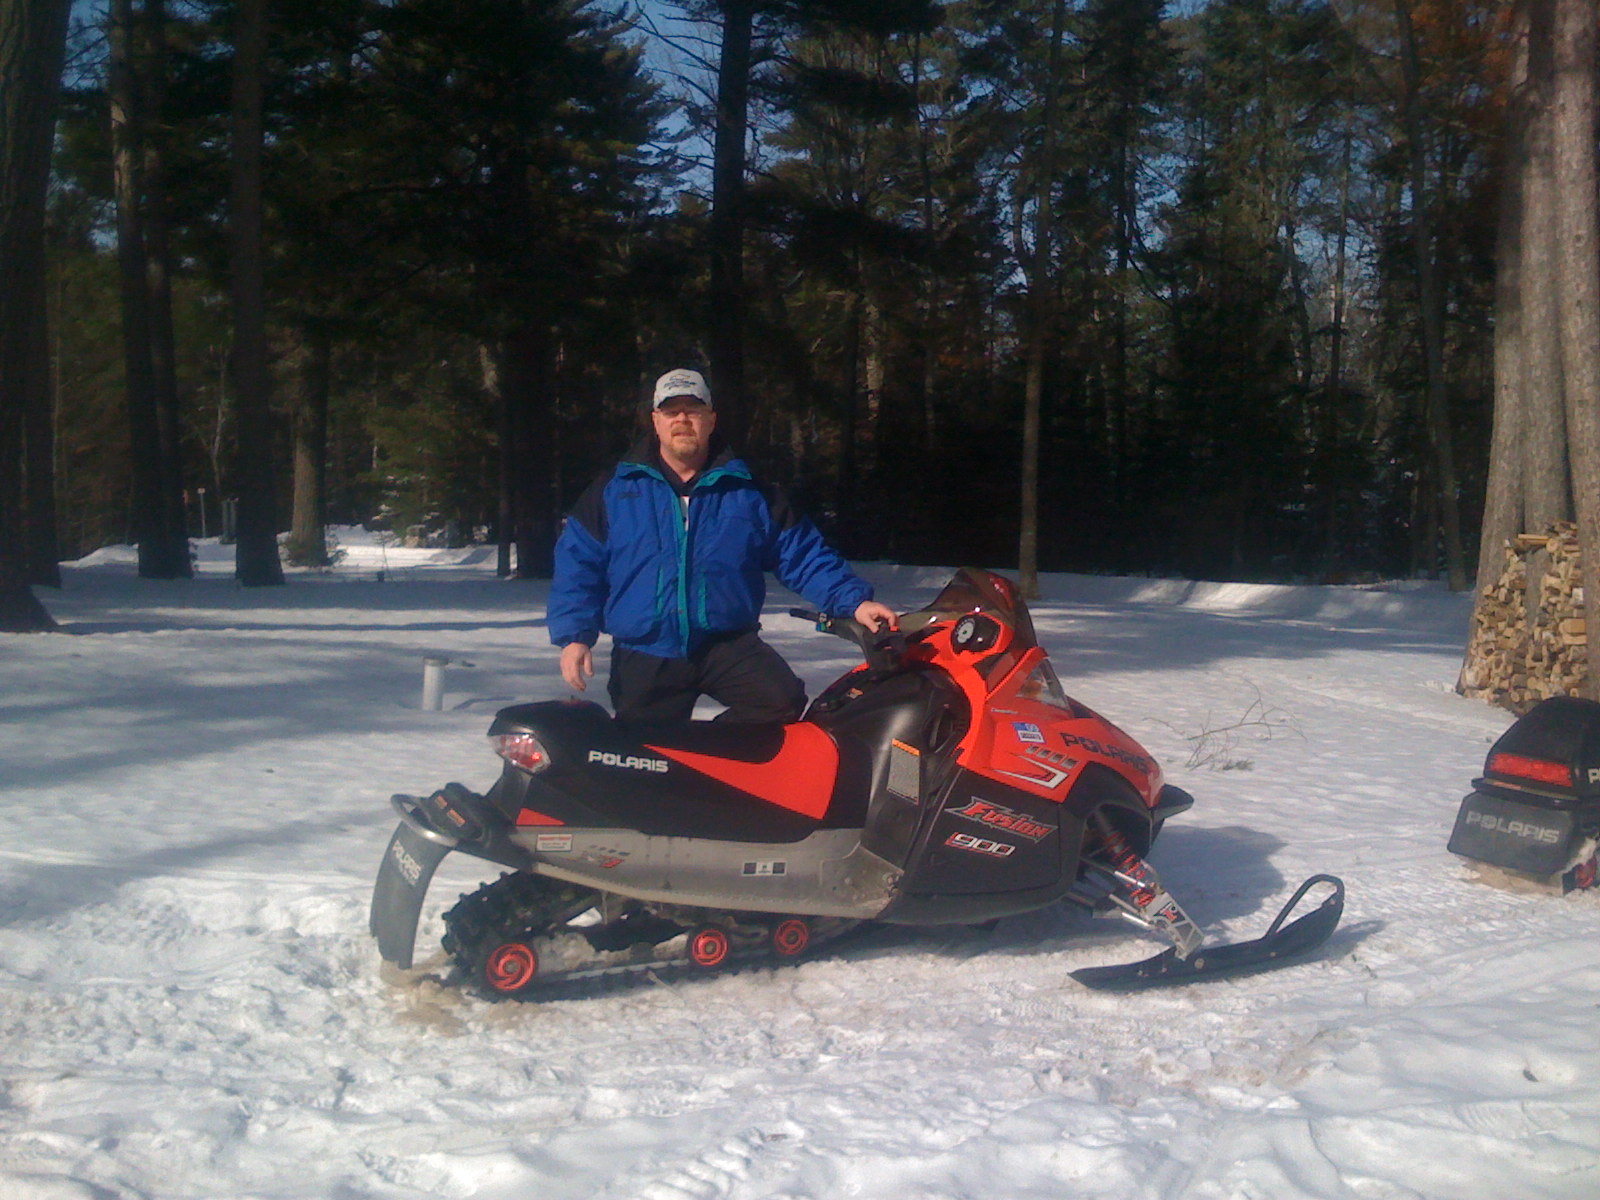 Ted Cahall and his Polaris Fusion 900 Snowmobile